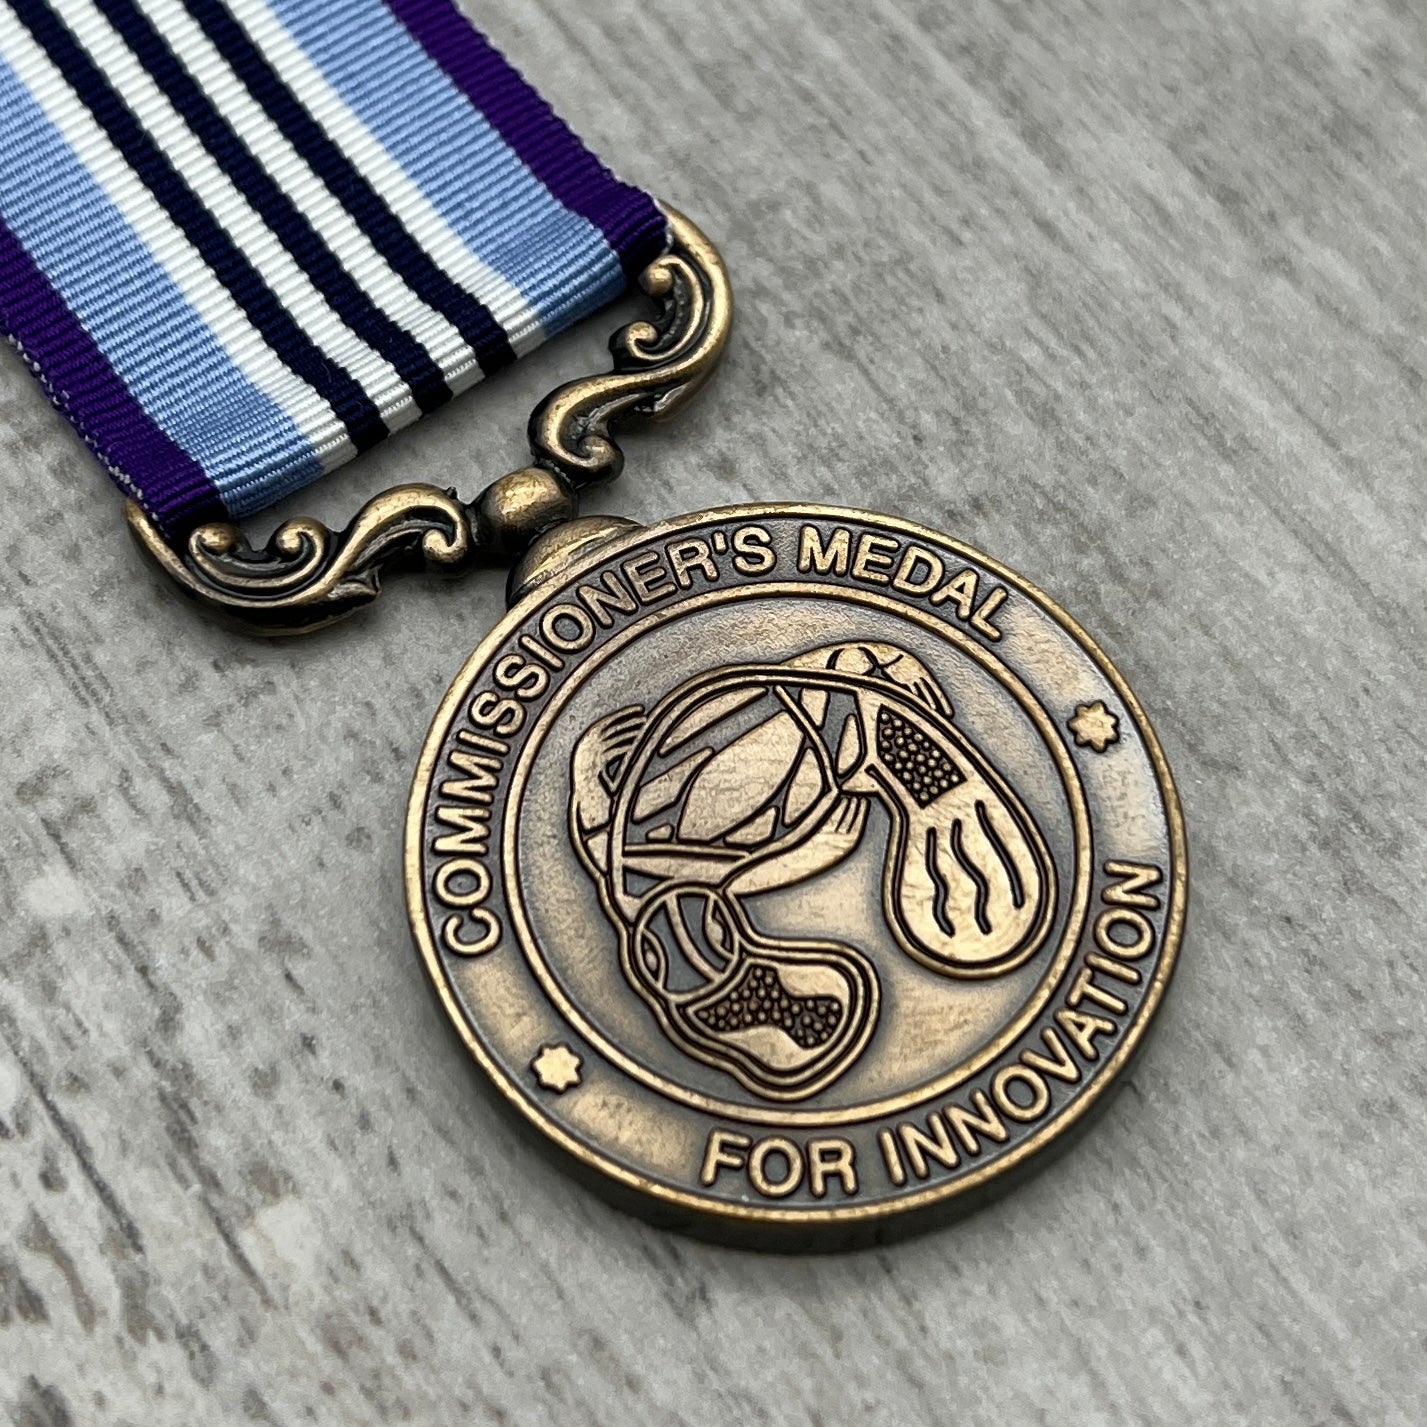 Australian Federal Police - Commissioner's Medal For Innovation - Foxhole Medals